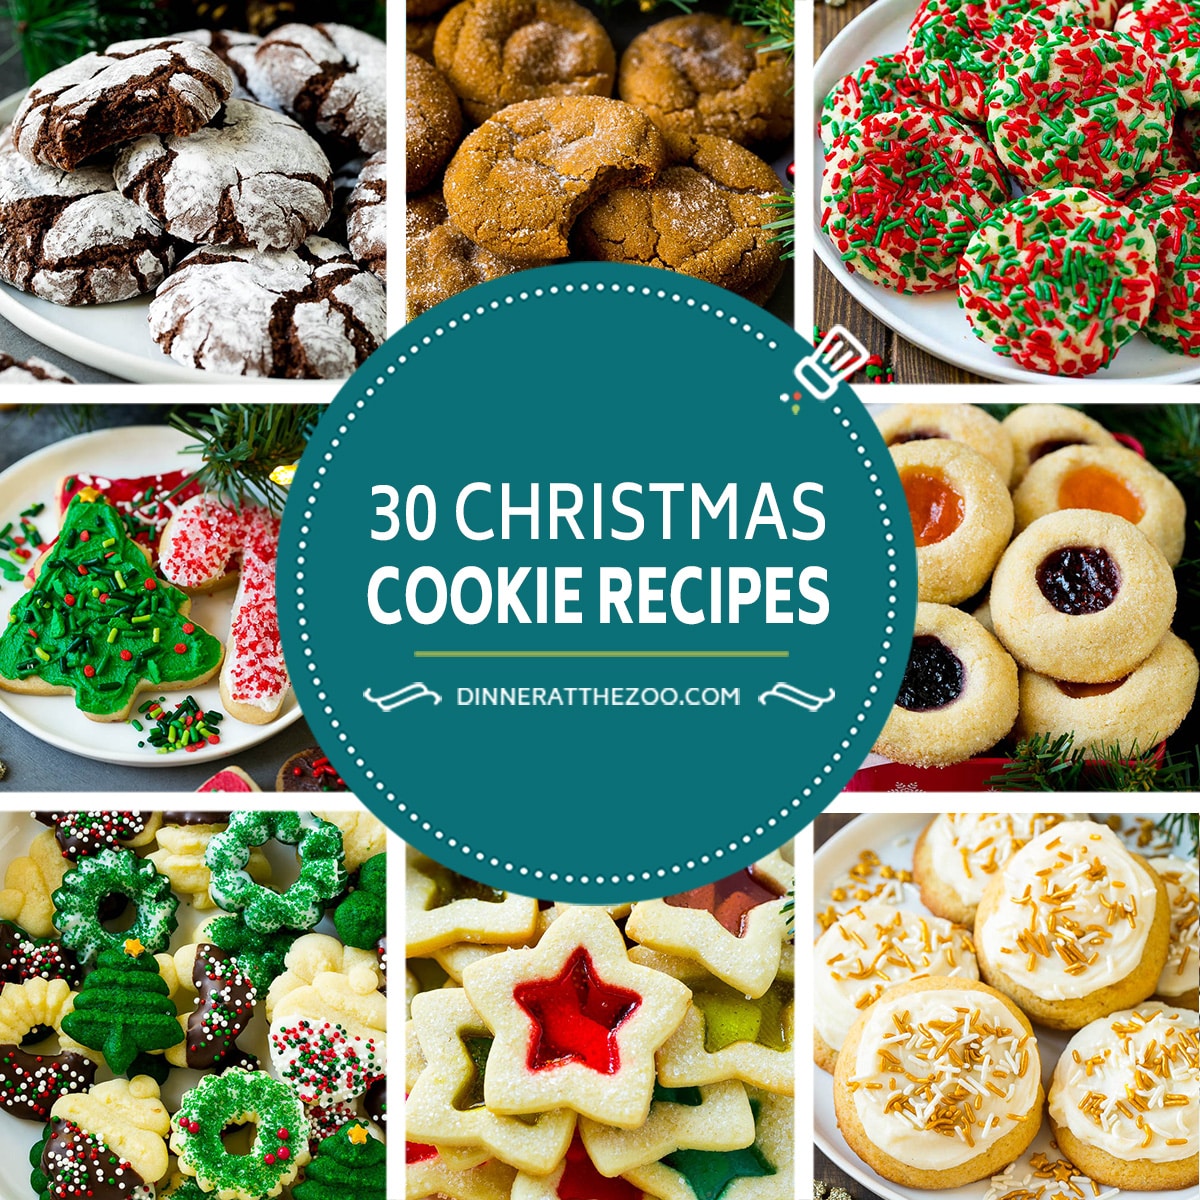 A collection of festive Christmas cookie recipes like thumbprint cookies, sugar cookies and molasses cookies.